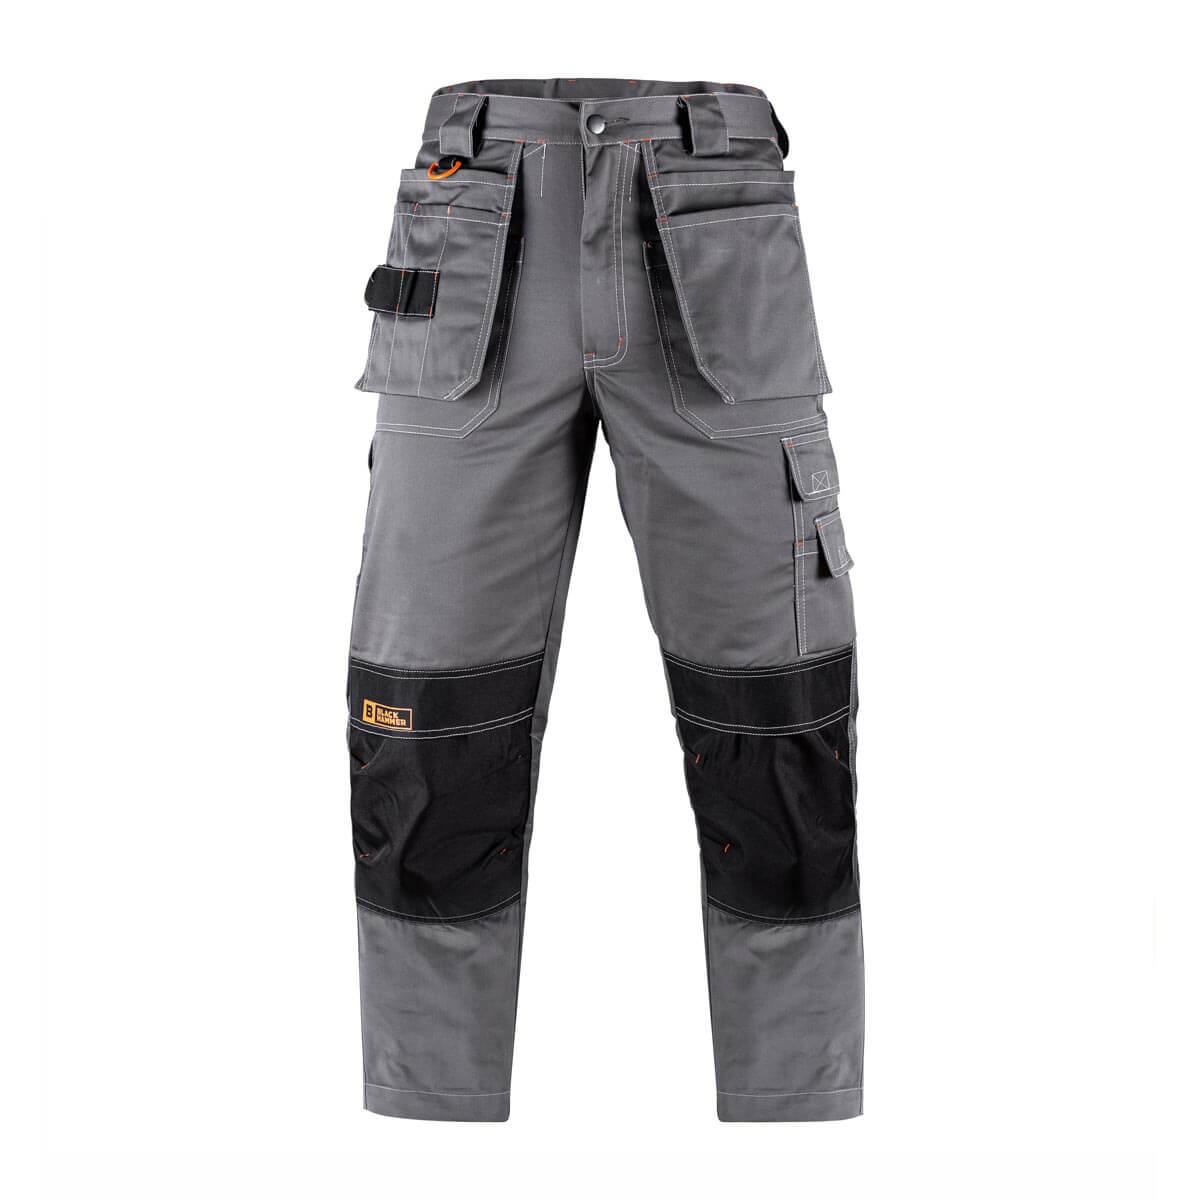 Grey, 4XL) UK Mens Elasticated Waist Cargo Combat Work Trousers Joggers  Pocket Cuffed Pants on OnBuy